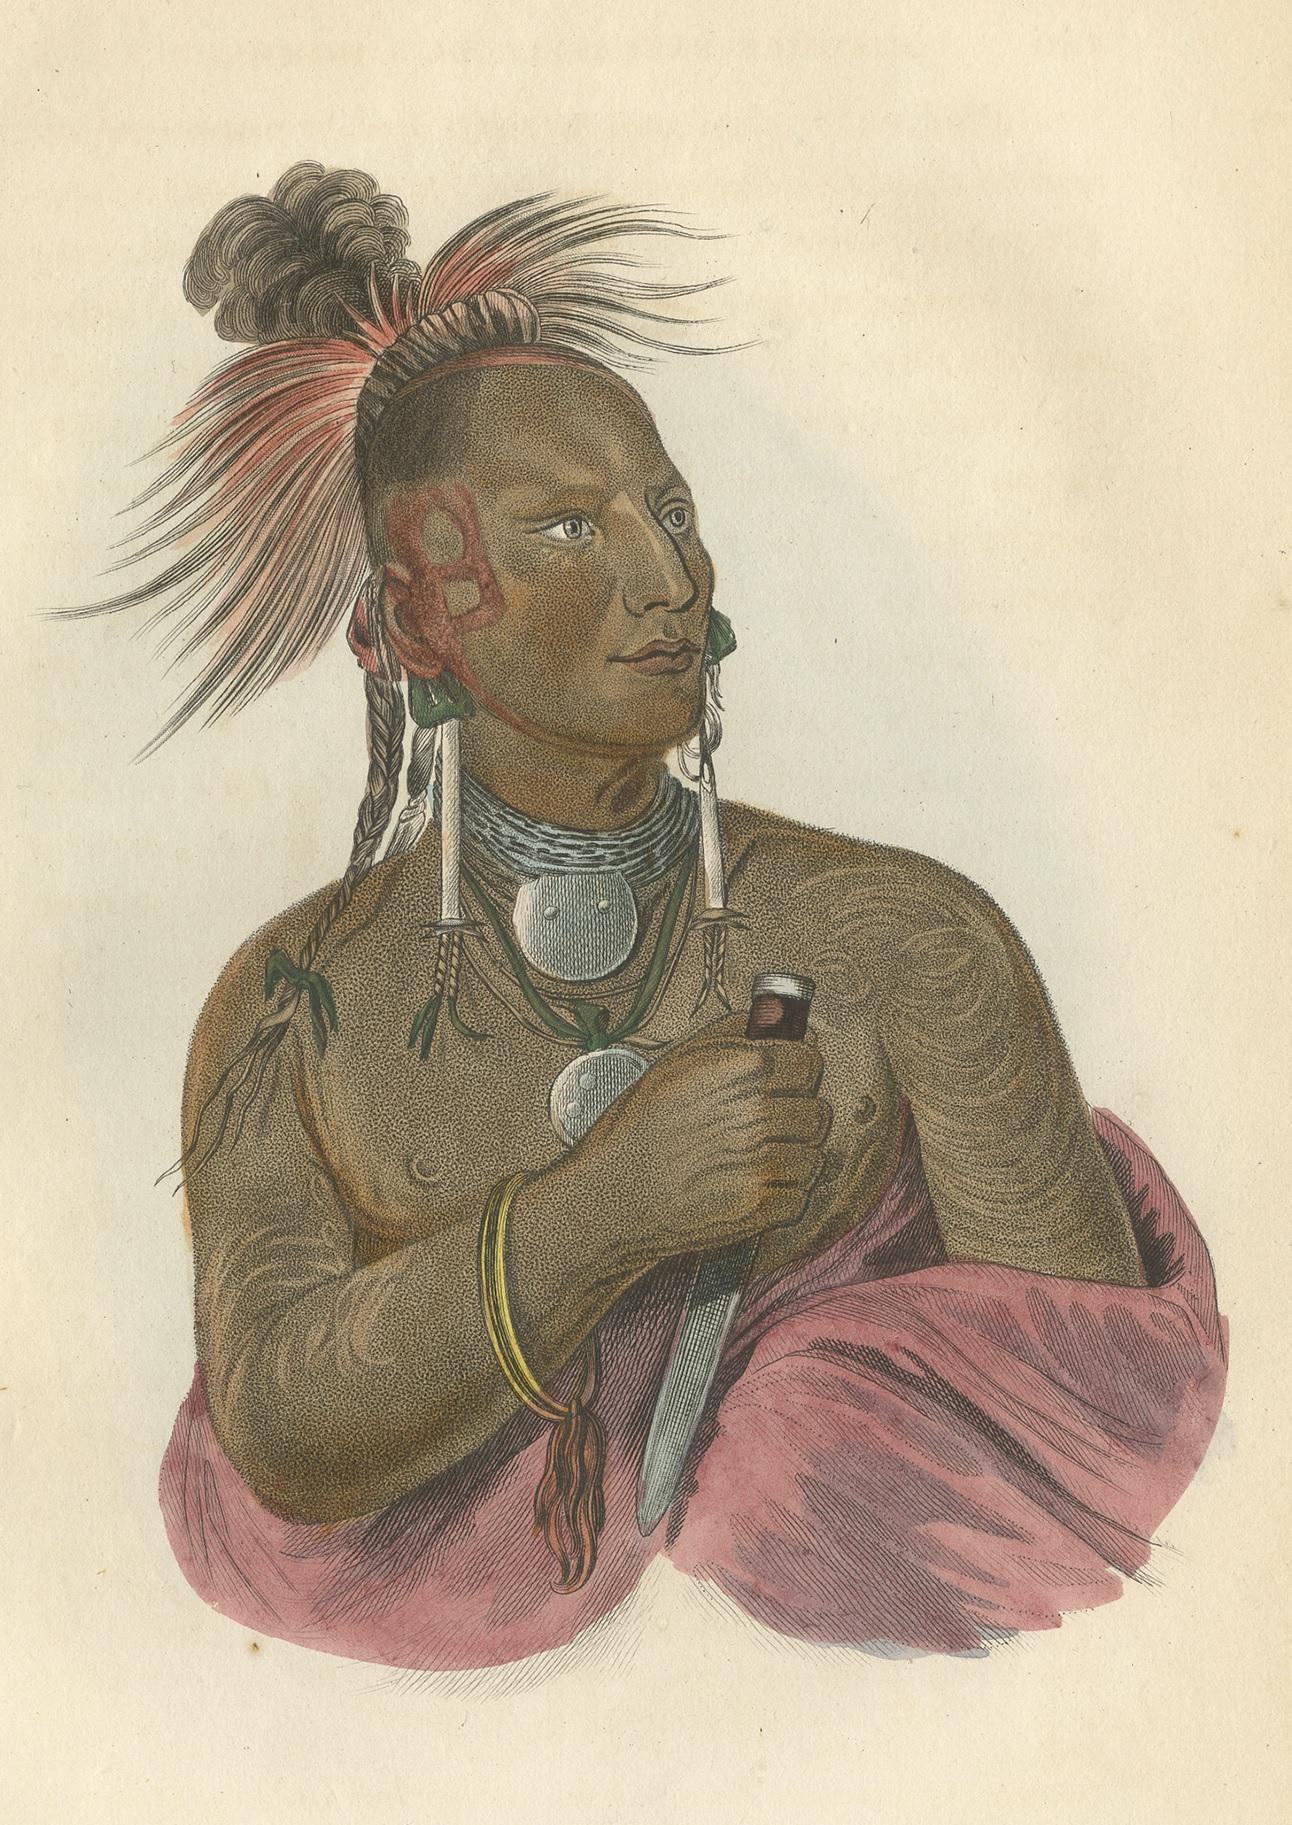 Antique print titled 'Meach-O-Shin-Gaw'. Lithograph of a warrior of the Kaw Nation. The Kaw Nation (or Kanza or Kansa) are a federally recognized Native American tribe in Oklahoma and parts of Kansas. The tribe known as Kaw have also been known as